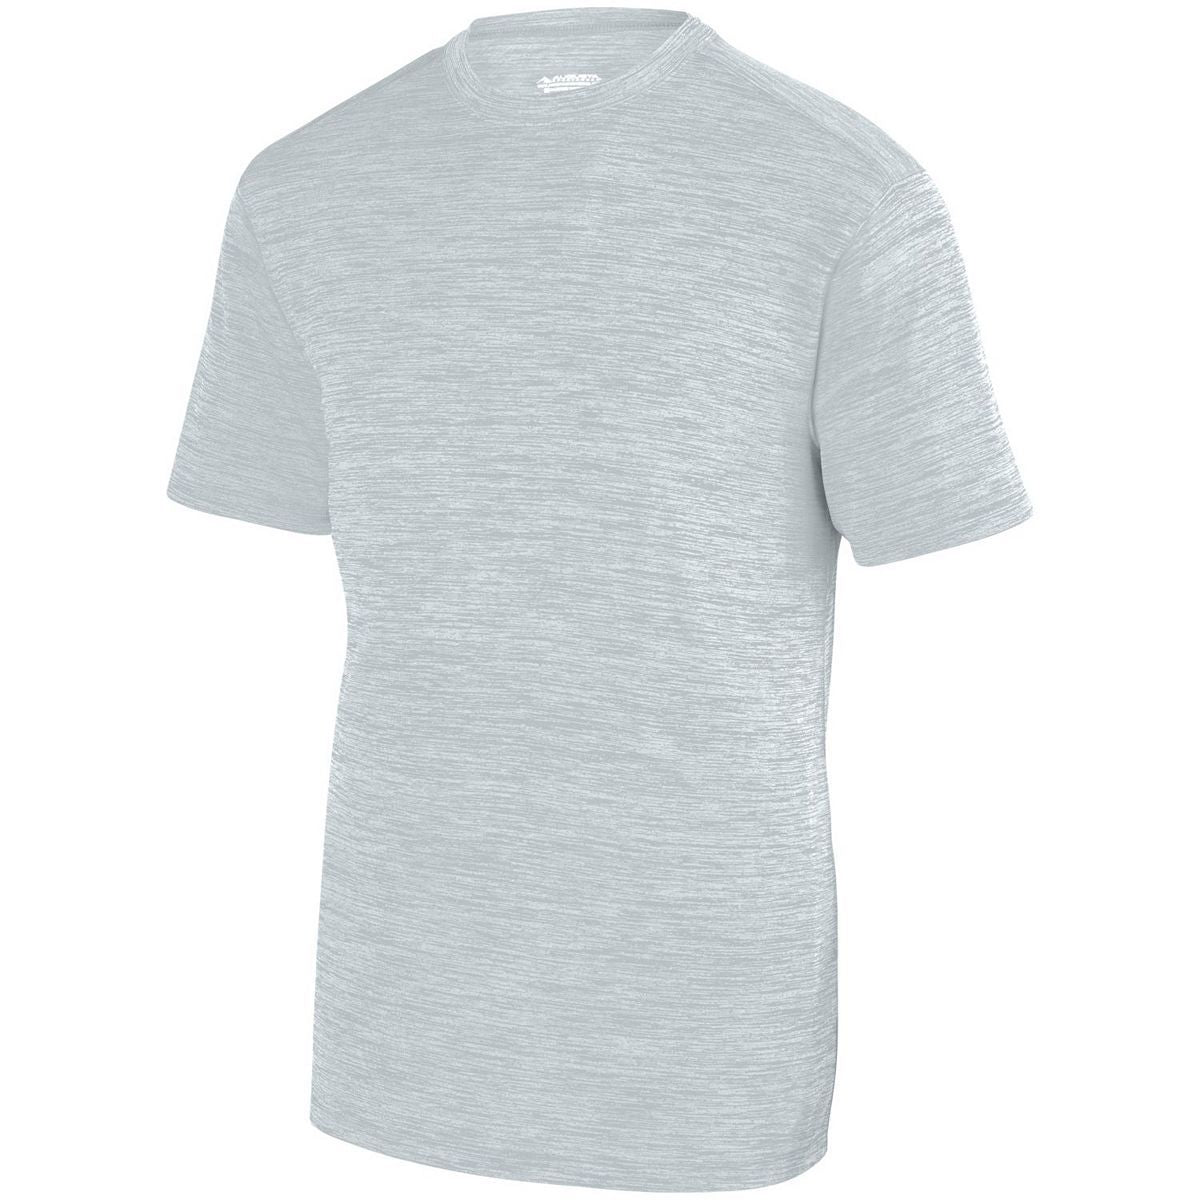 Augusta Sportswear Shadow Tonal Heather Training Tee in Silver  -Part of the Adult, Adult-Tee-Shirt, T-Shirts, Augusta-Products, Shirts, Tonal-Fleece-Collection product lines at KanaleyCreations.com